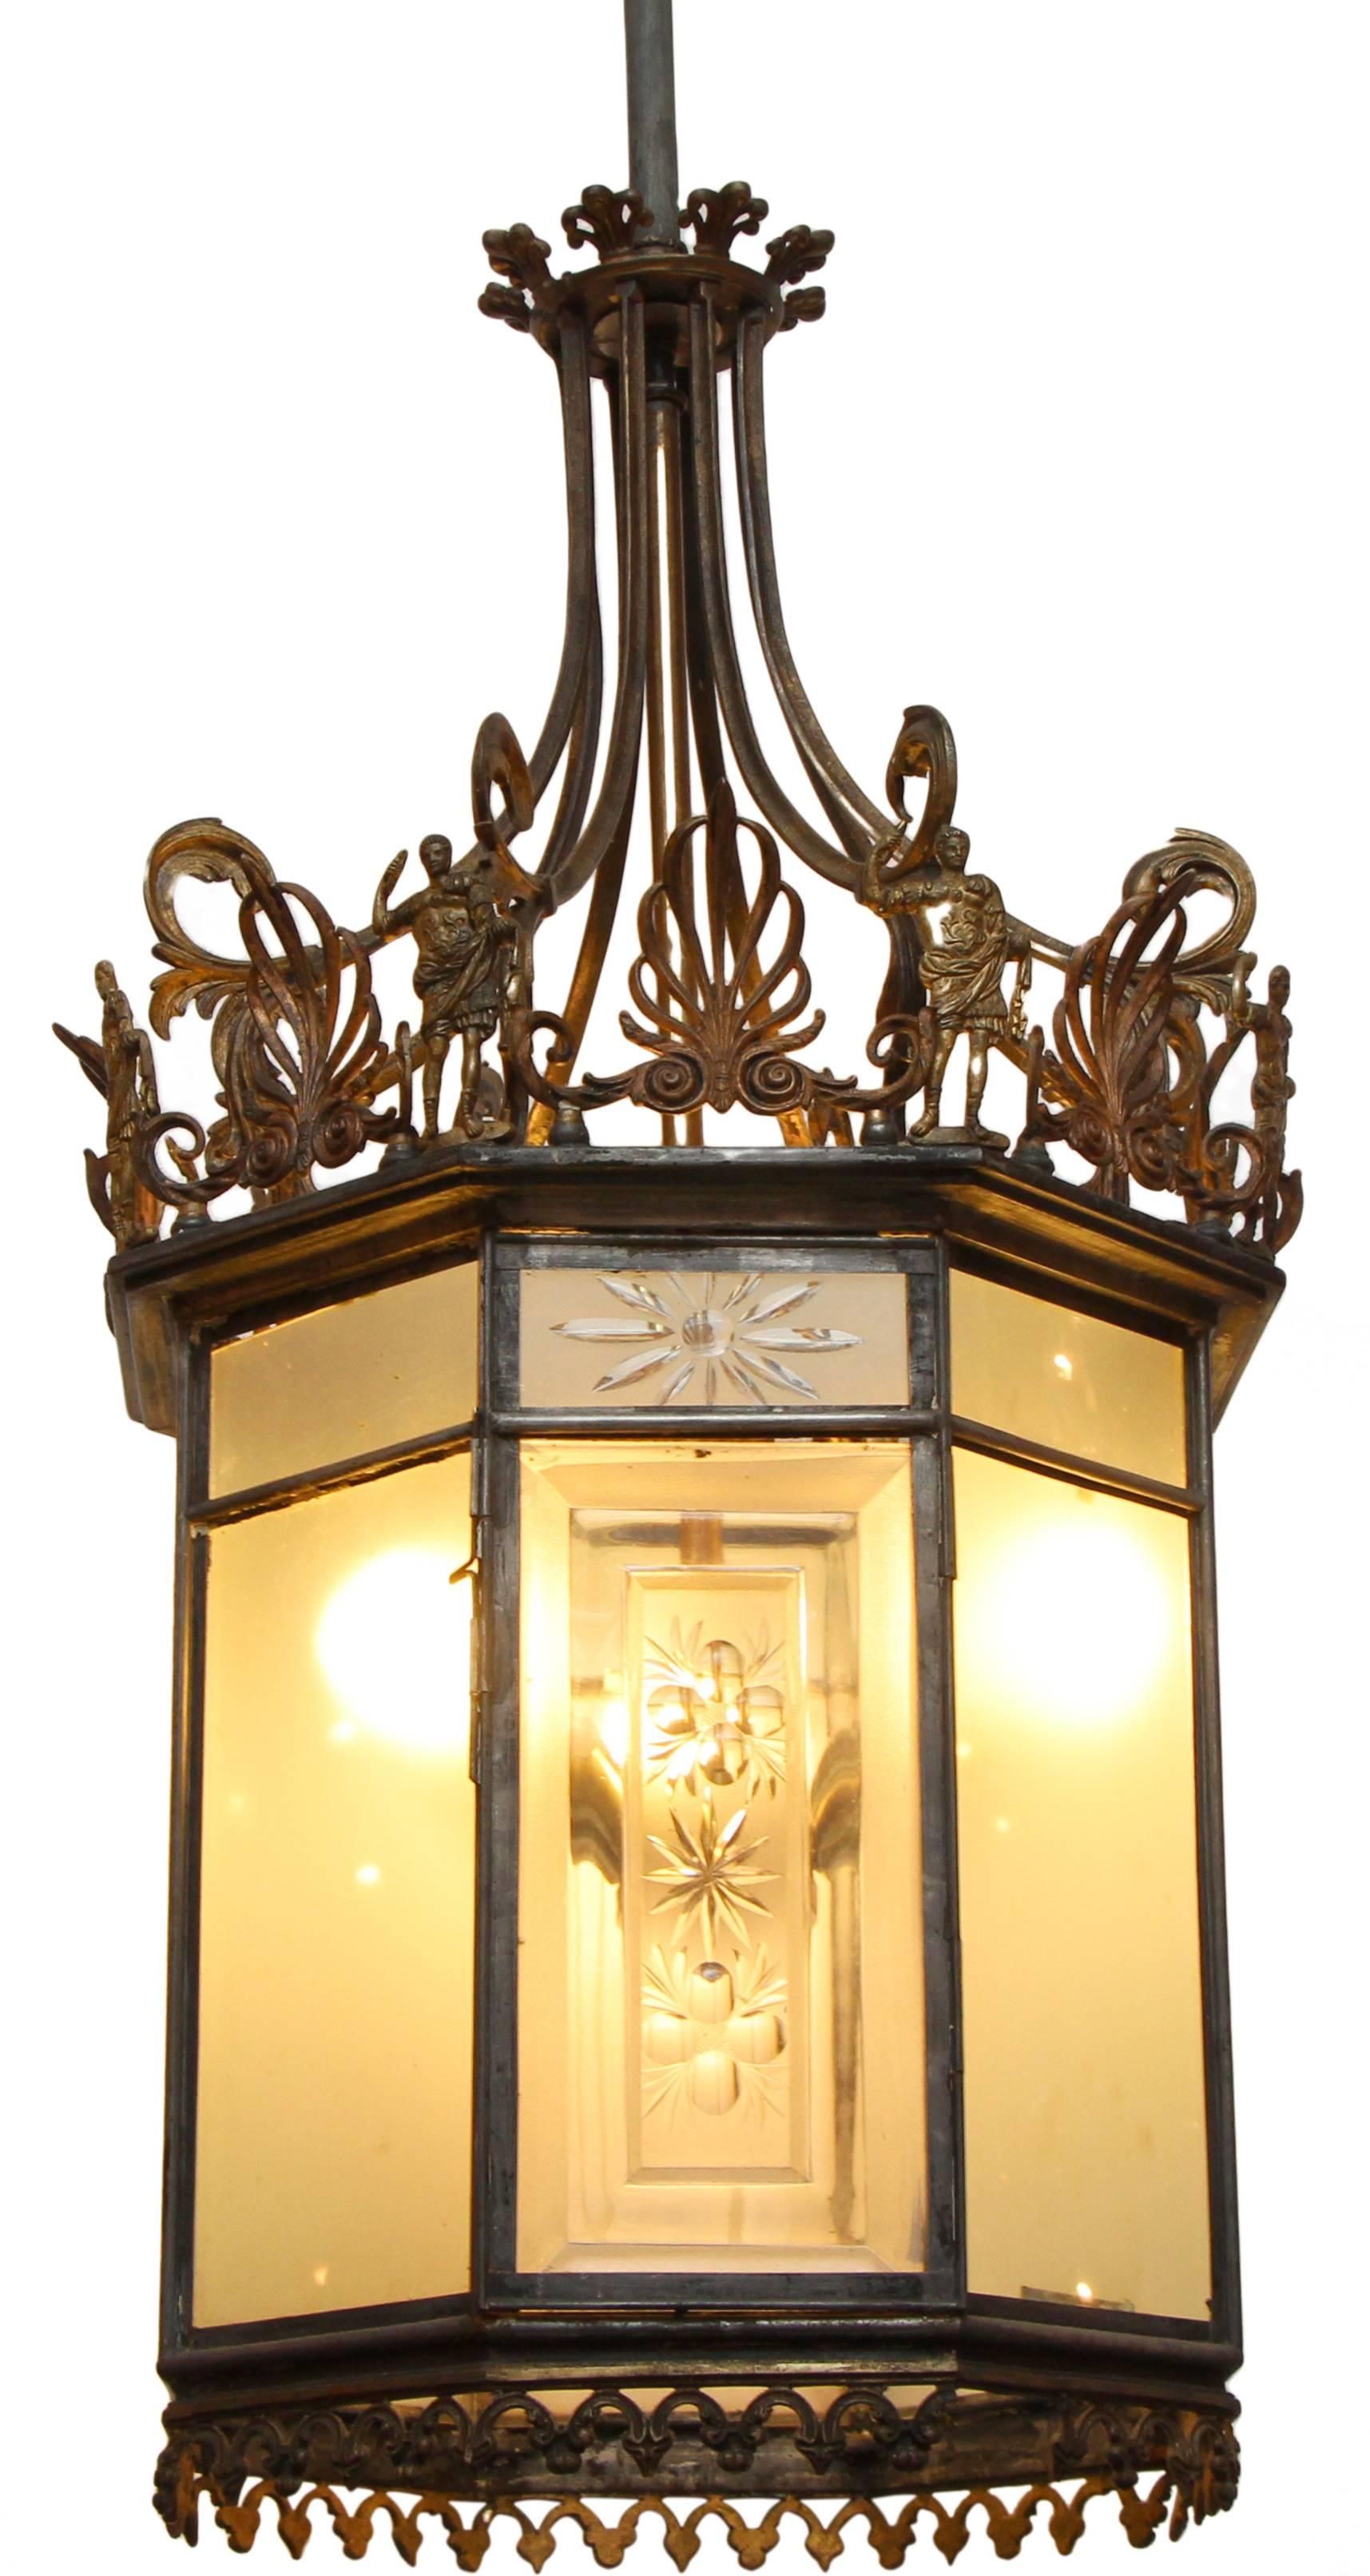 1890s Large bronze and etched glass three light hall lantern. Features amazing bronze detailed framing. This originally graced the entryway of the Pen and Brush Club in Manhattan, and was originally a gas light converted to electric. Cleaned and